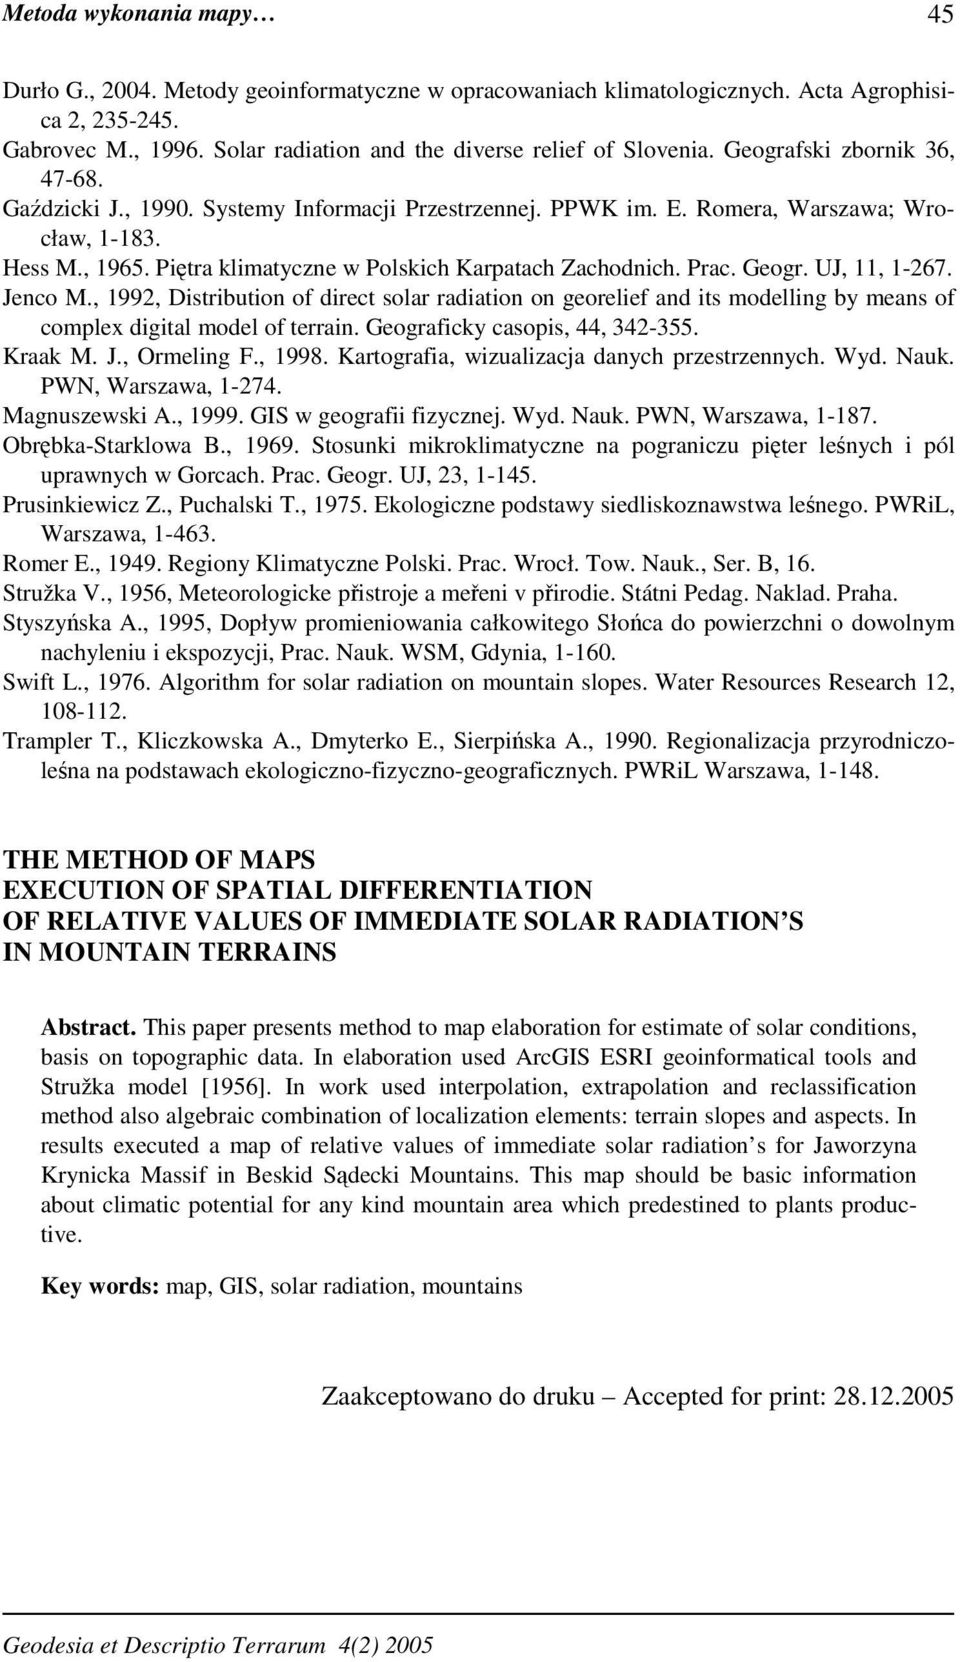 Prac. Geogr. UJ, 11, 1-267. Jenco M., 1992, Distribution of direct solar radiation on georelief and its modelling by means of complex digital model of terrain. Geograficky casopis, 44, 342-355.